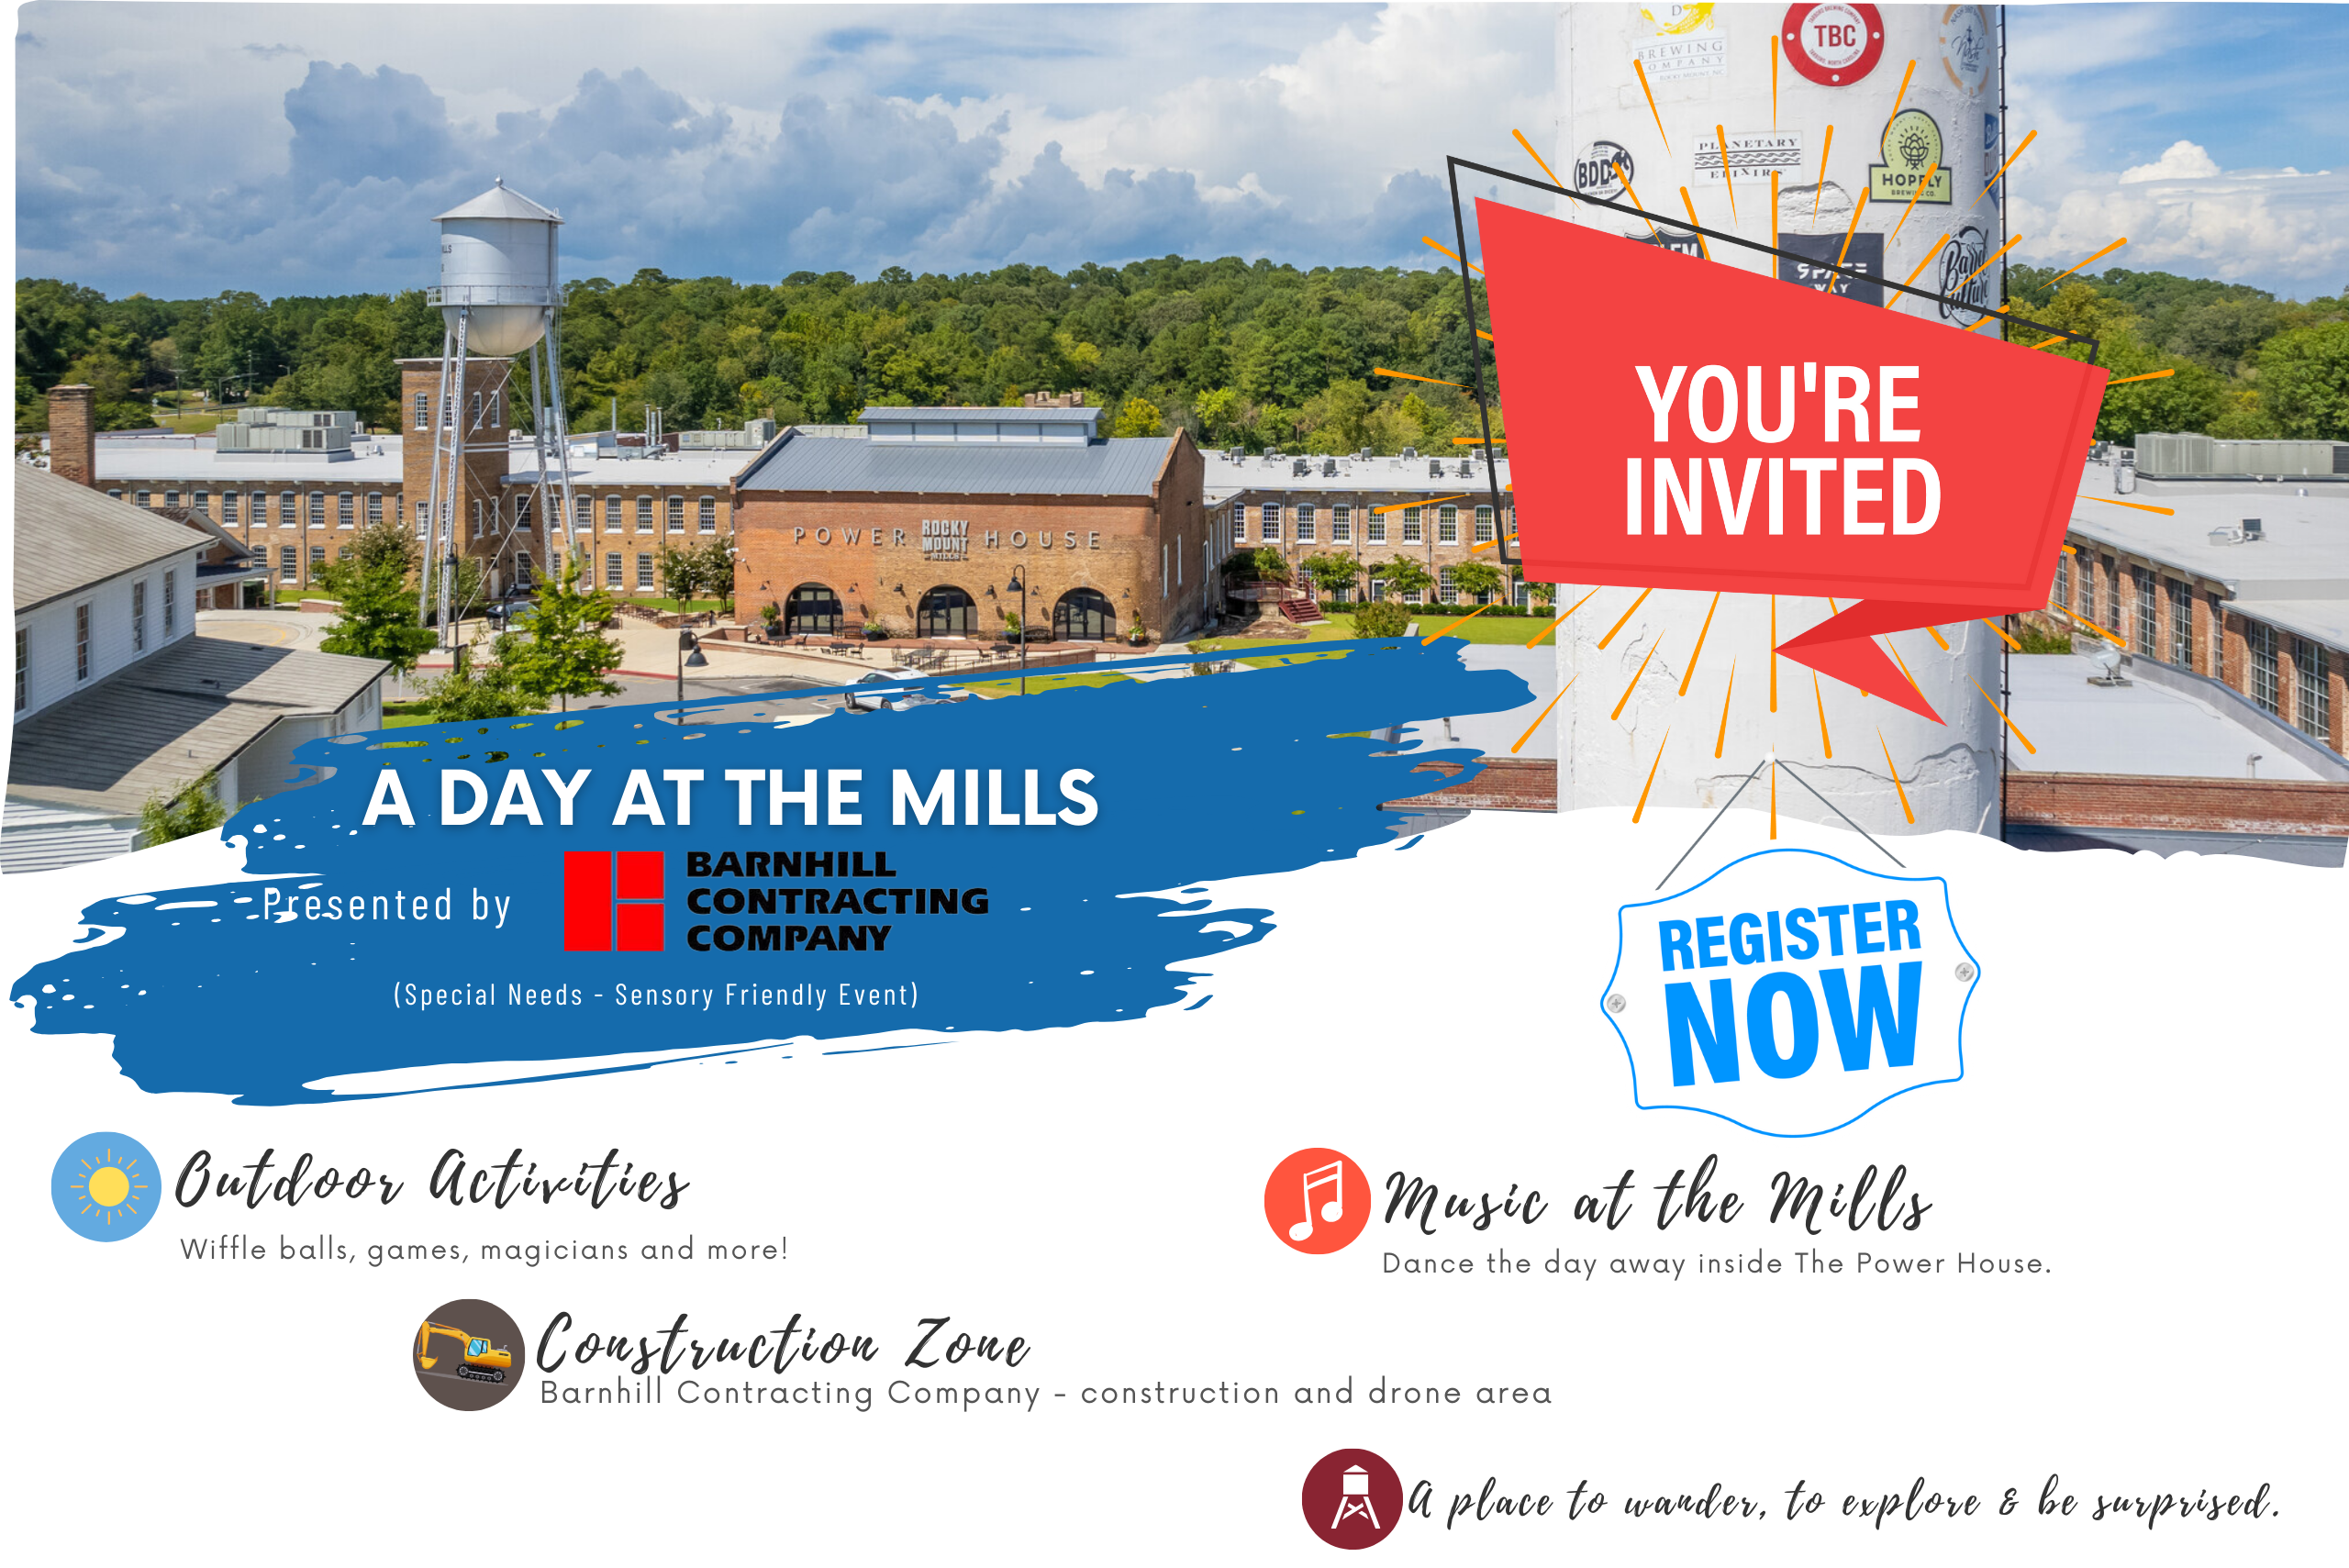 A Day at The Mills Presented by Barnhill Contracting Company